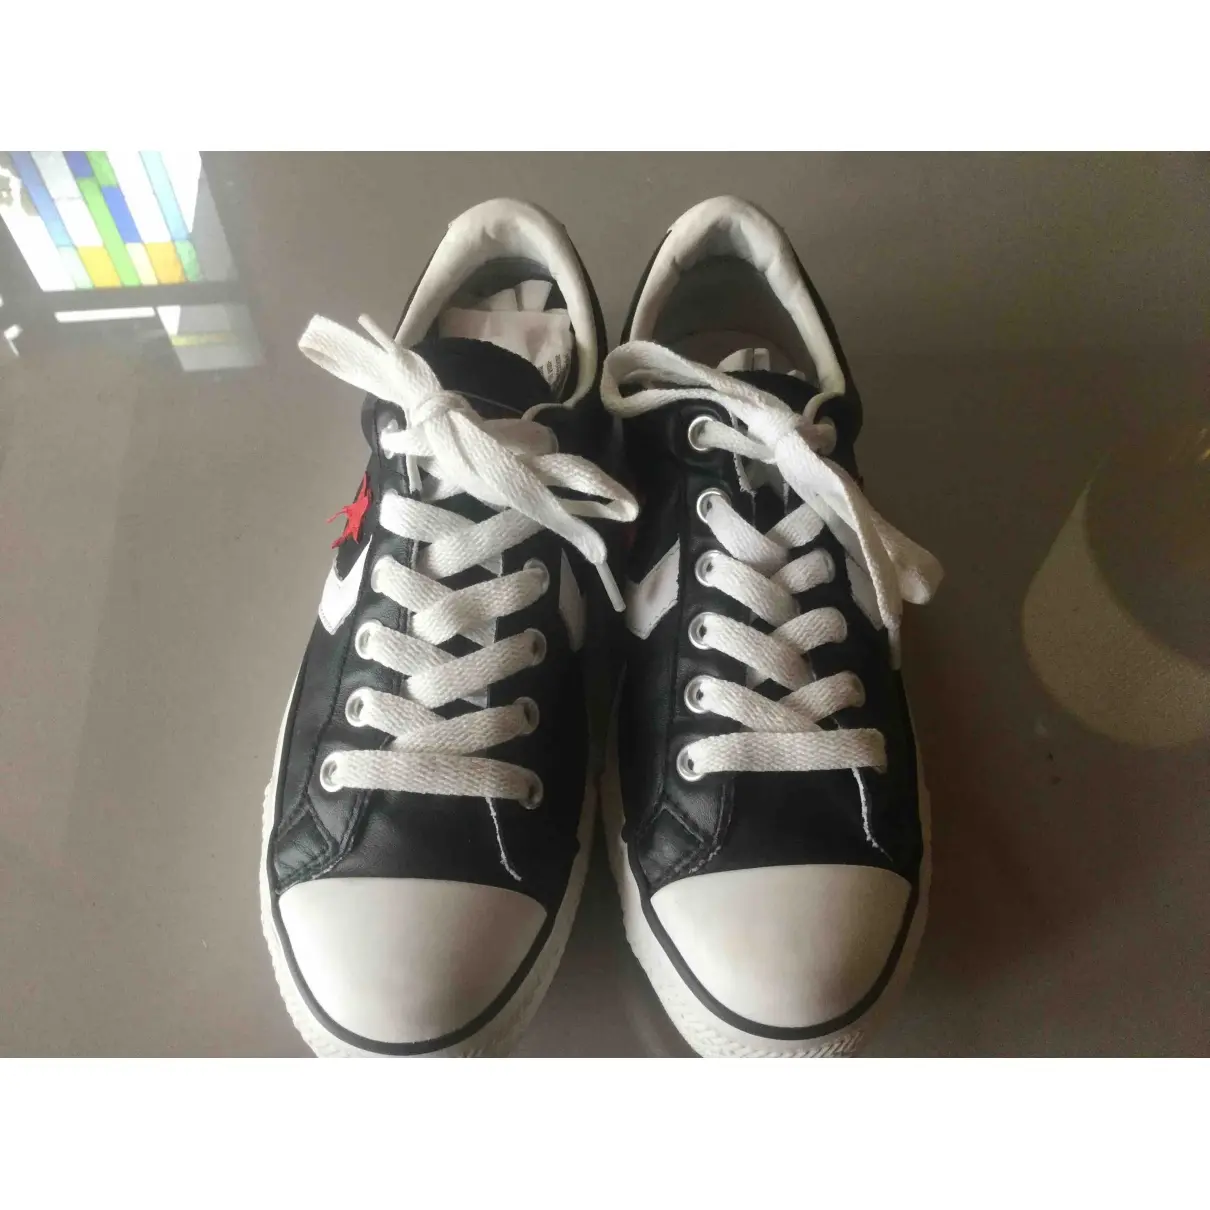 Converse Leather low trainers for sale